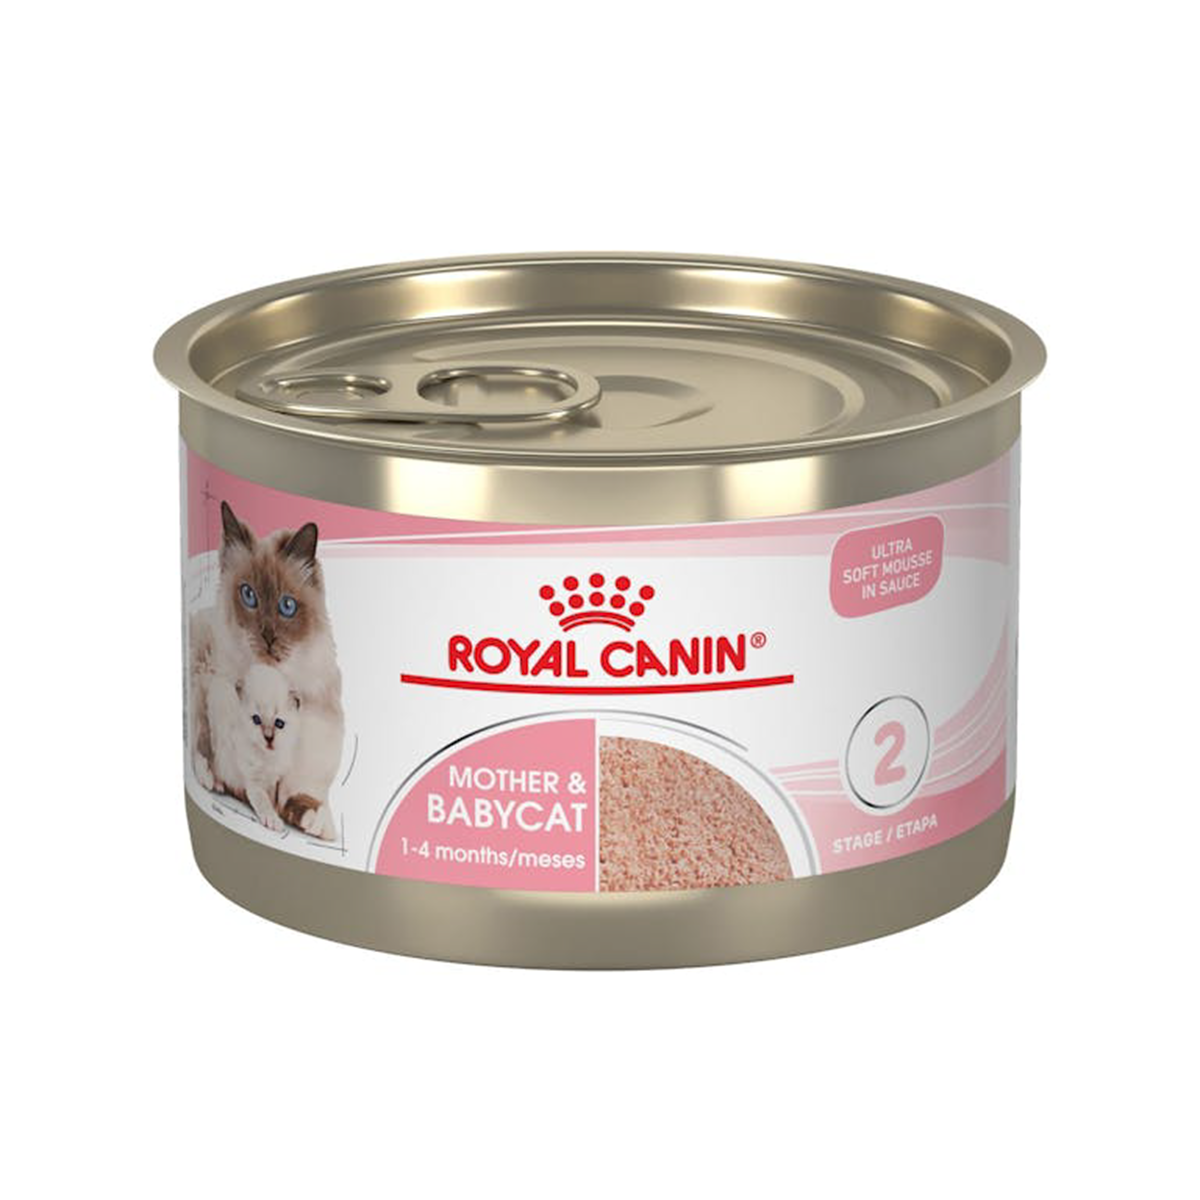 Royal Canin Mother & Babycat Ultra Soft Mousse in Sauce Wet Cat Food